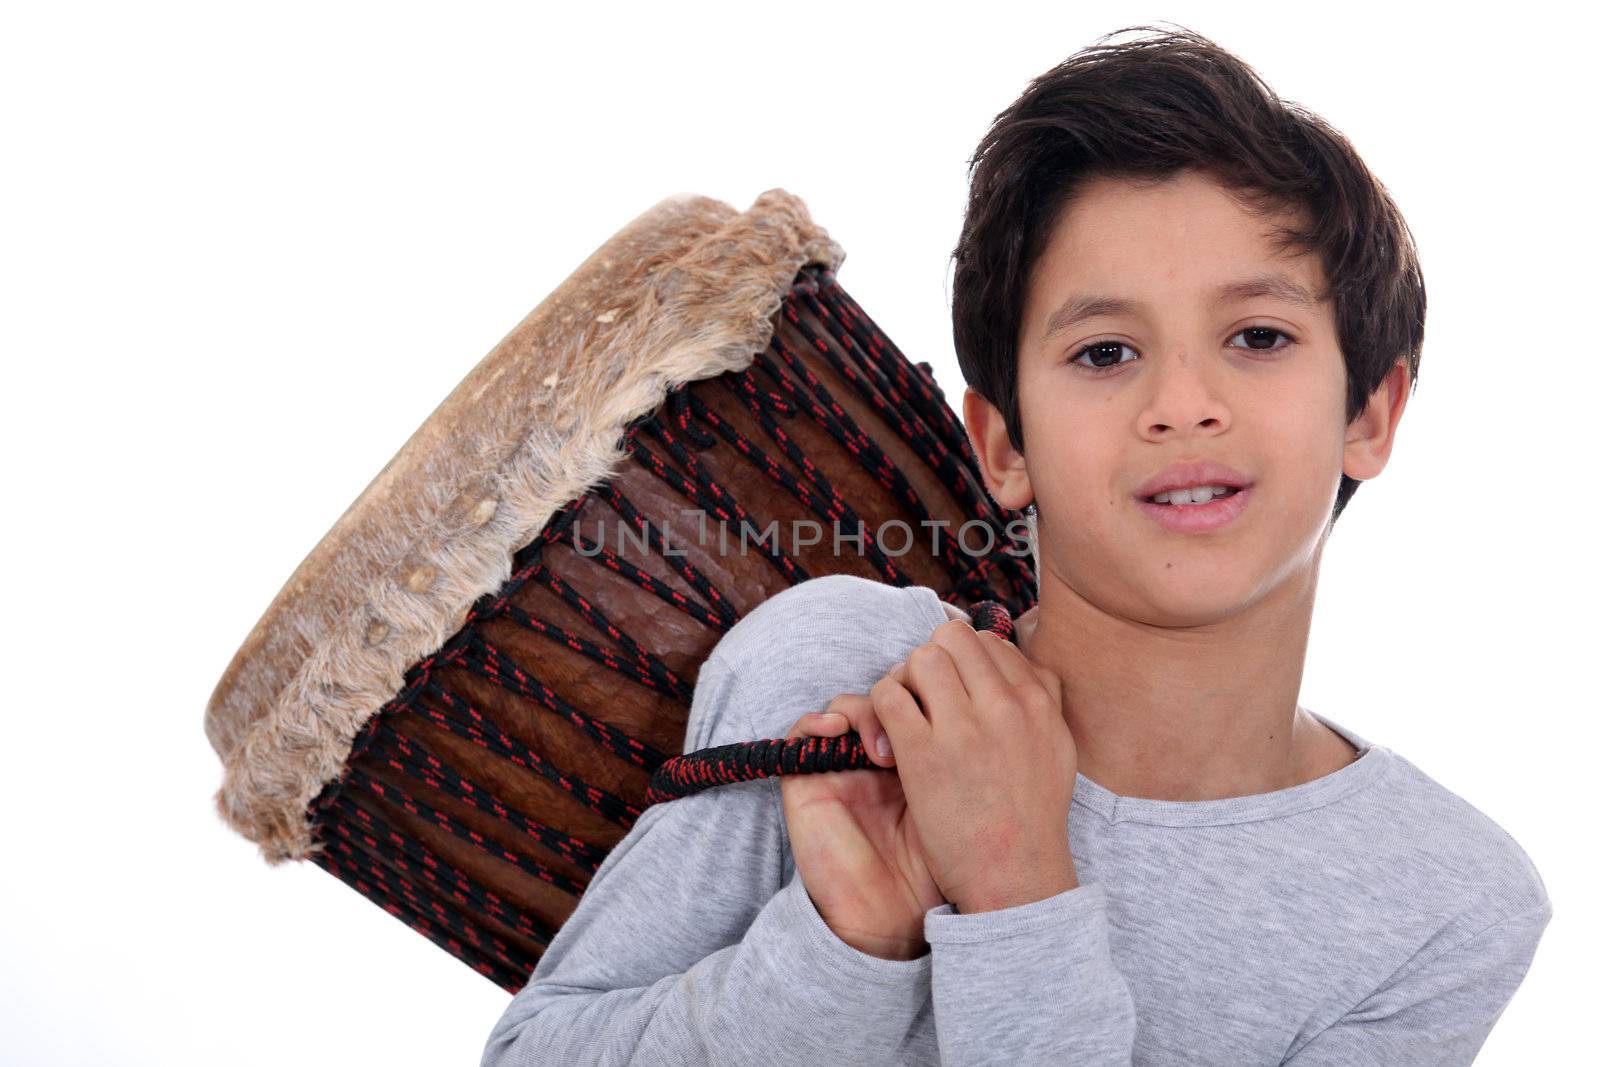 Boy with a bongo by phovoir